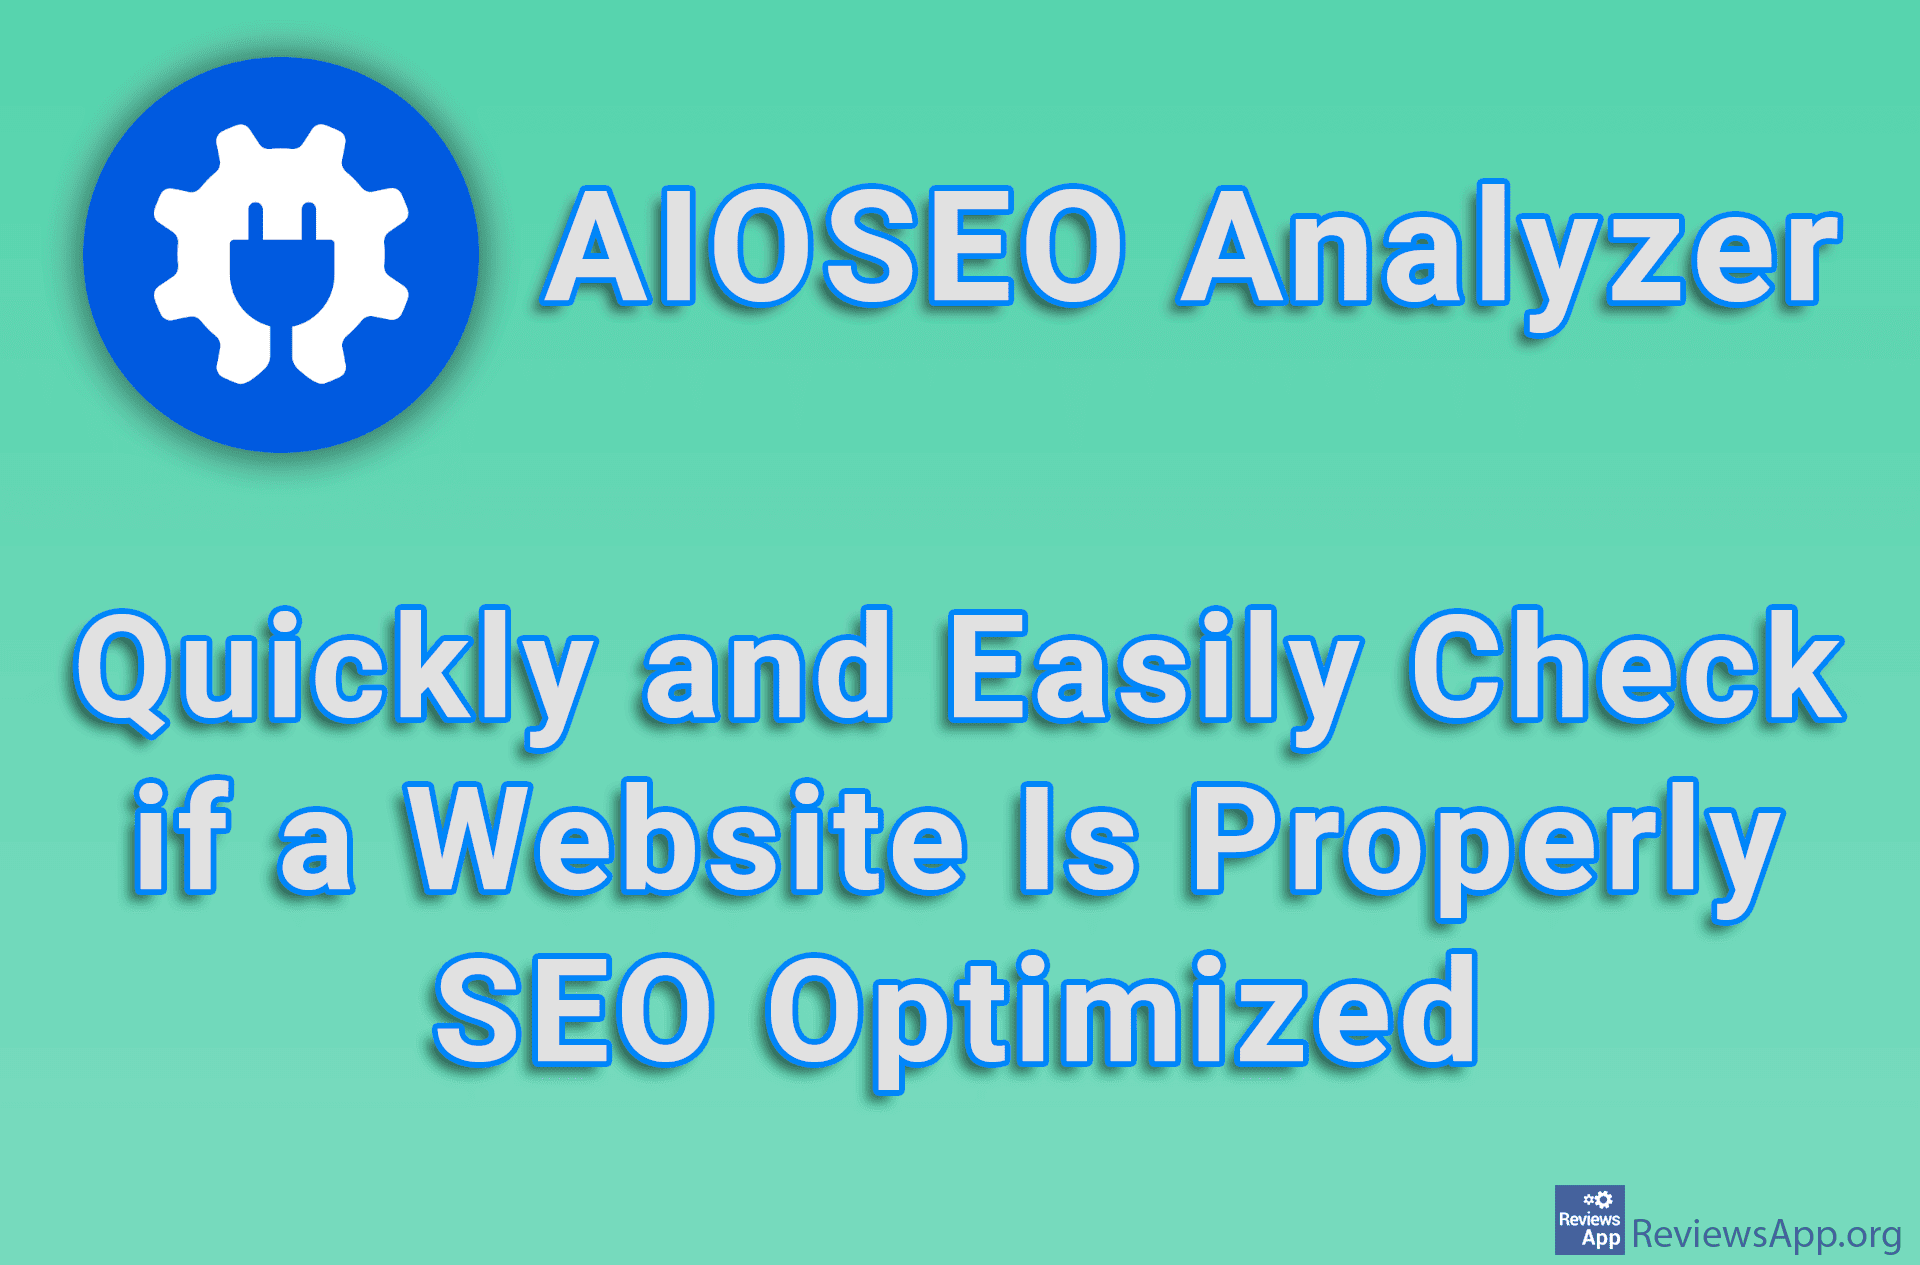 AIOSEO Analyzer – Quickly and Easily Check if a Website Is Properly SEO Optimized